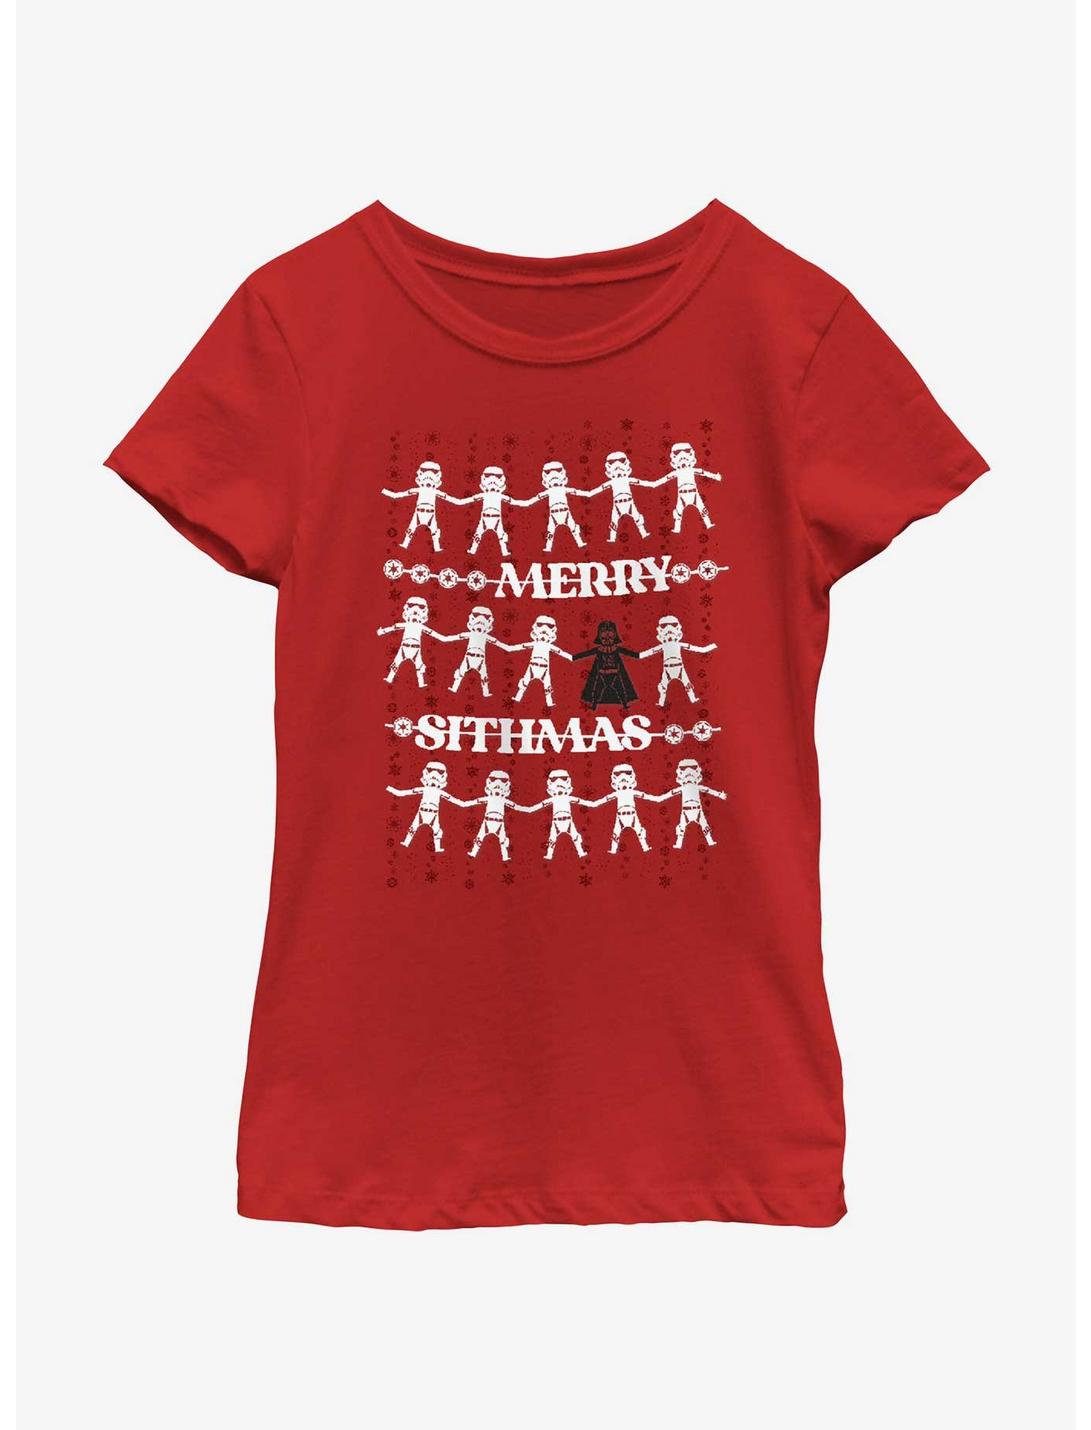 Star Wars Empire Merry Sithmas Greetings Youth Girls T-Shirt, RED, hi-res